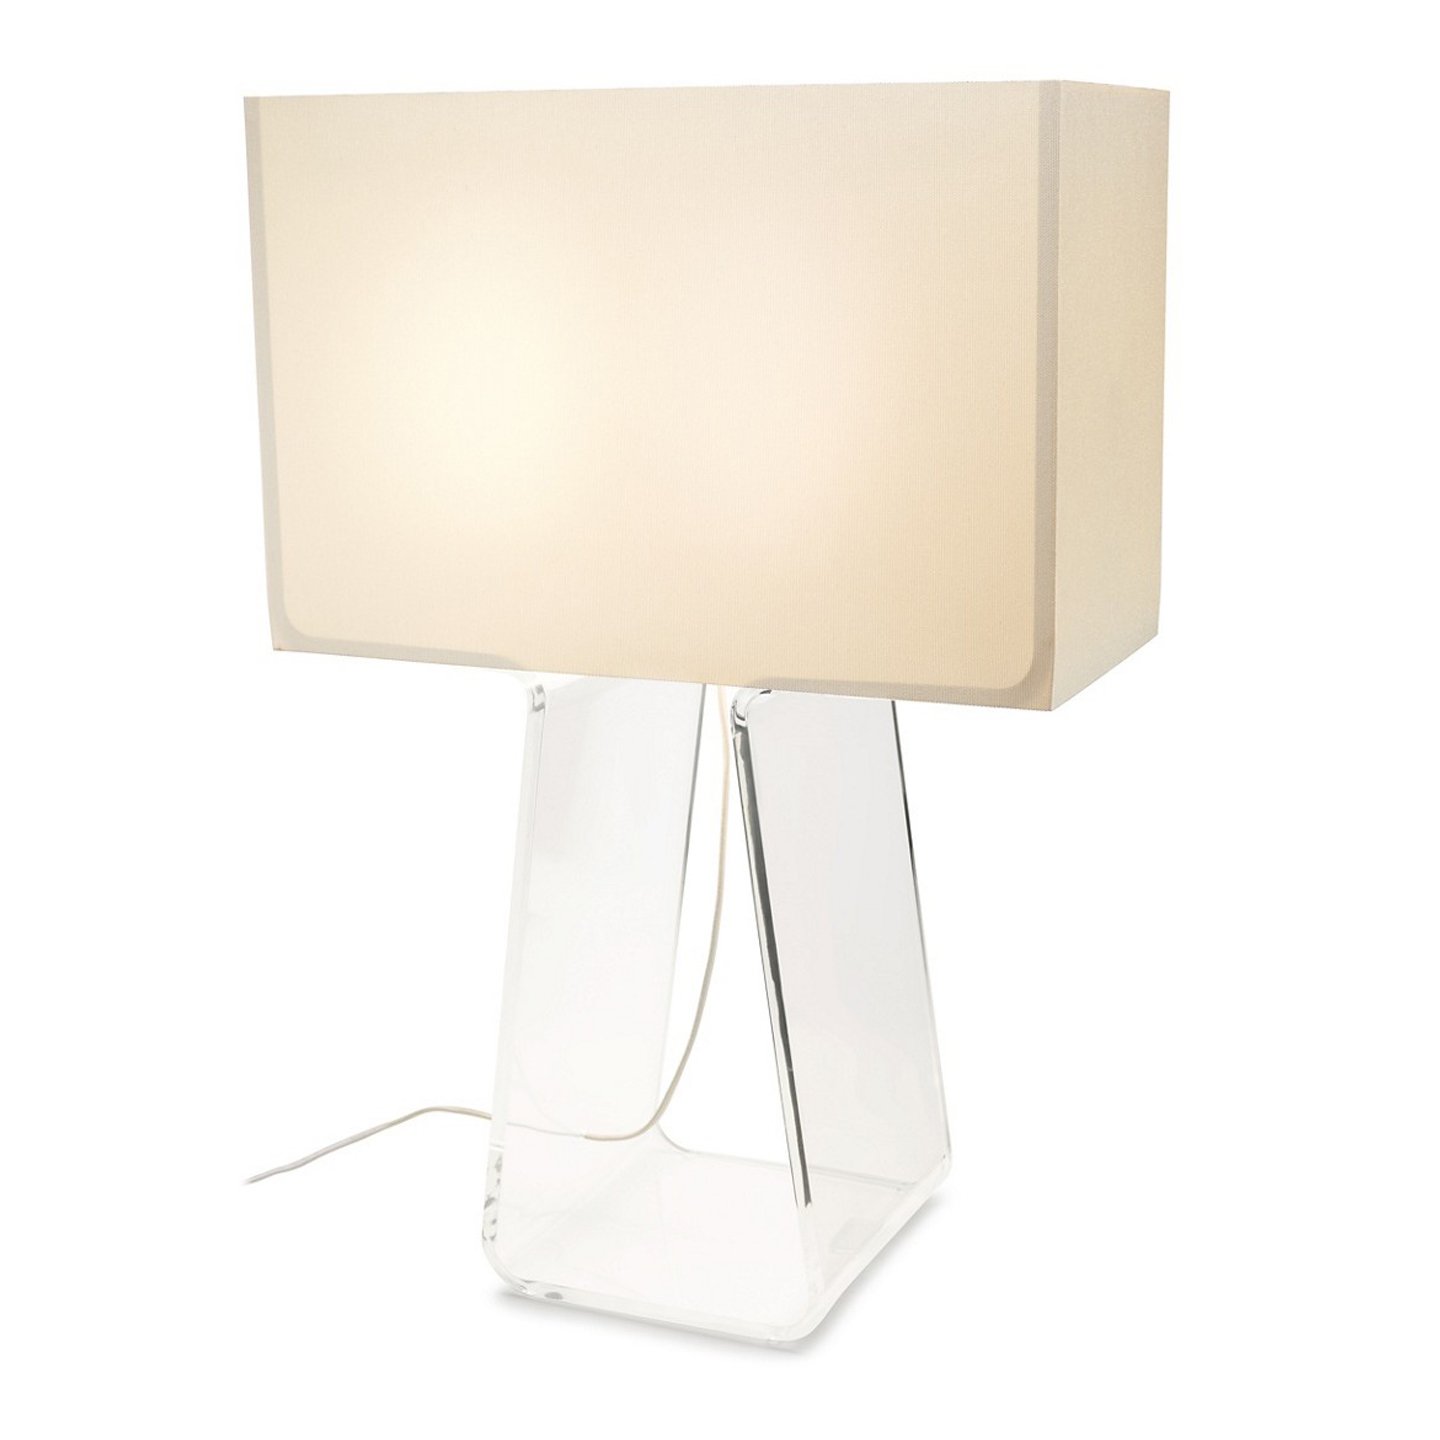 Haworth Tube Top Lighting in white color and clear base